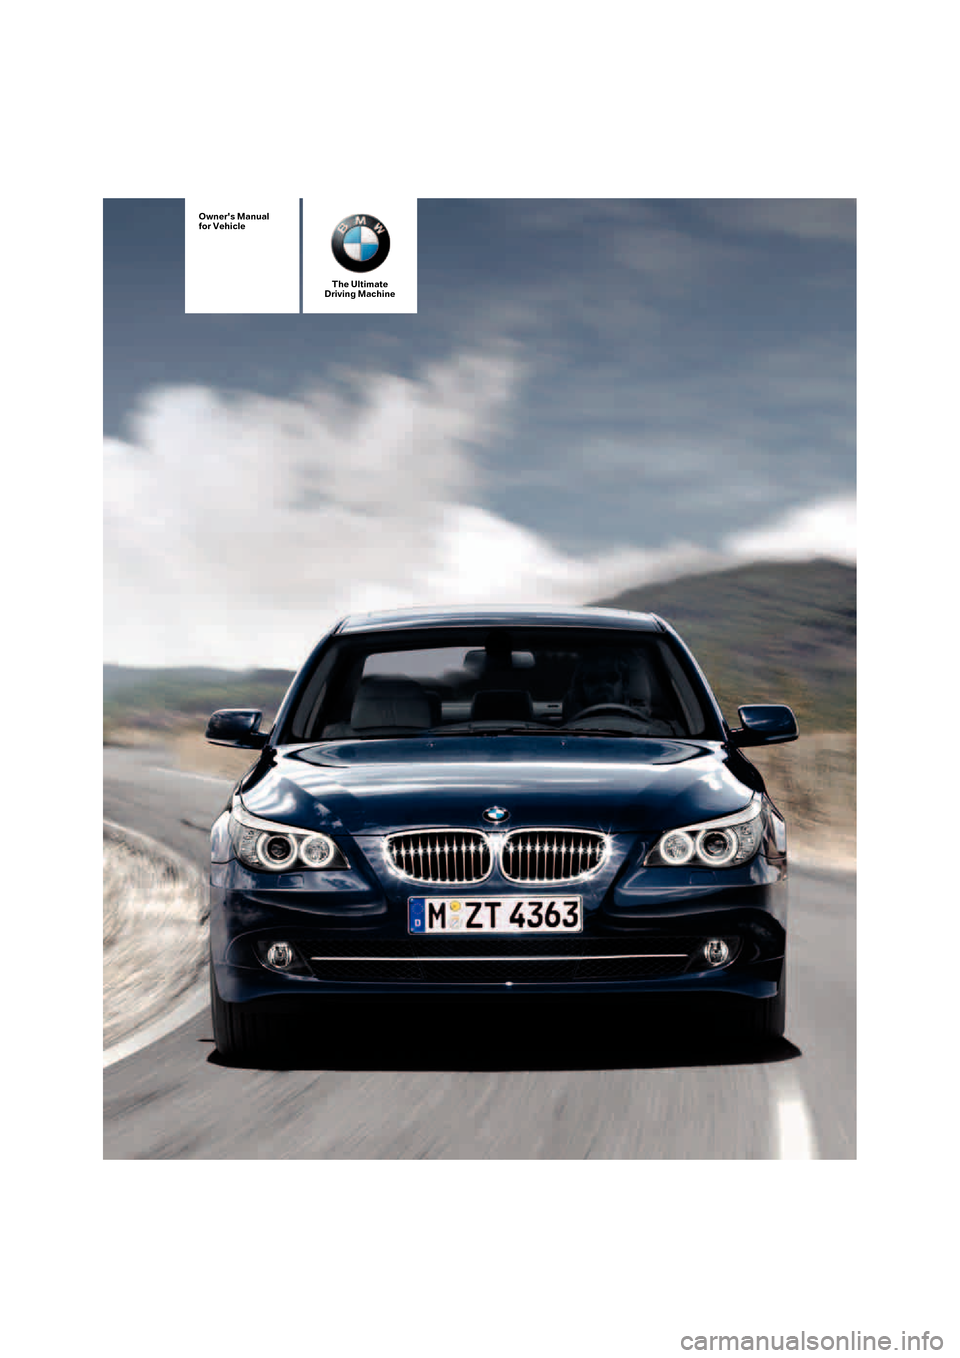 BMW 535XI SEDAN 2008 E60 Owners Manual The Ultimate
Driving Machine
Owners Manual
for Vehicle 